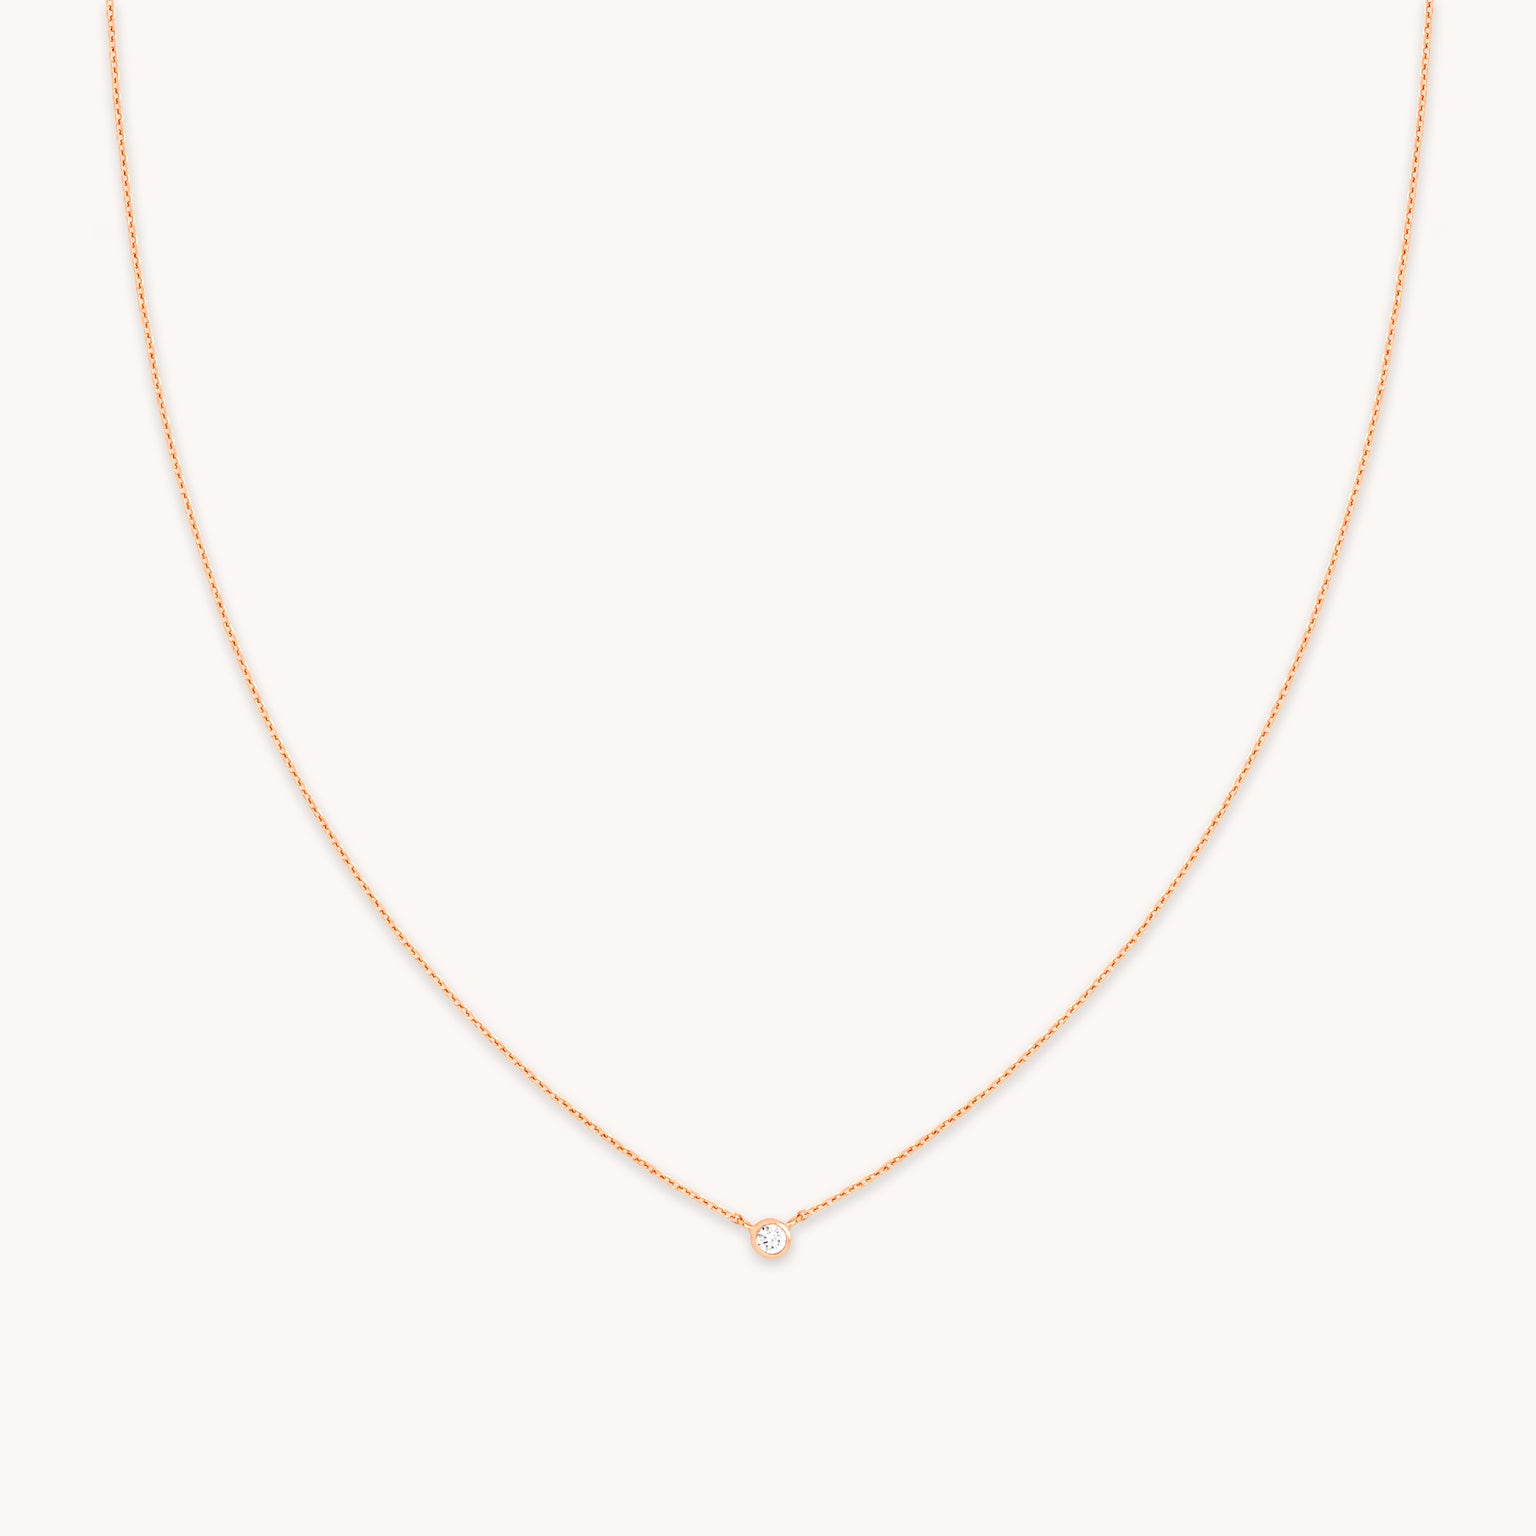 Rose Gold Tennis Chain Necklace | Astrid & Miyu Necklaces